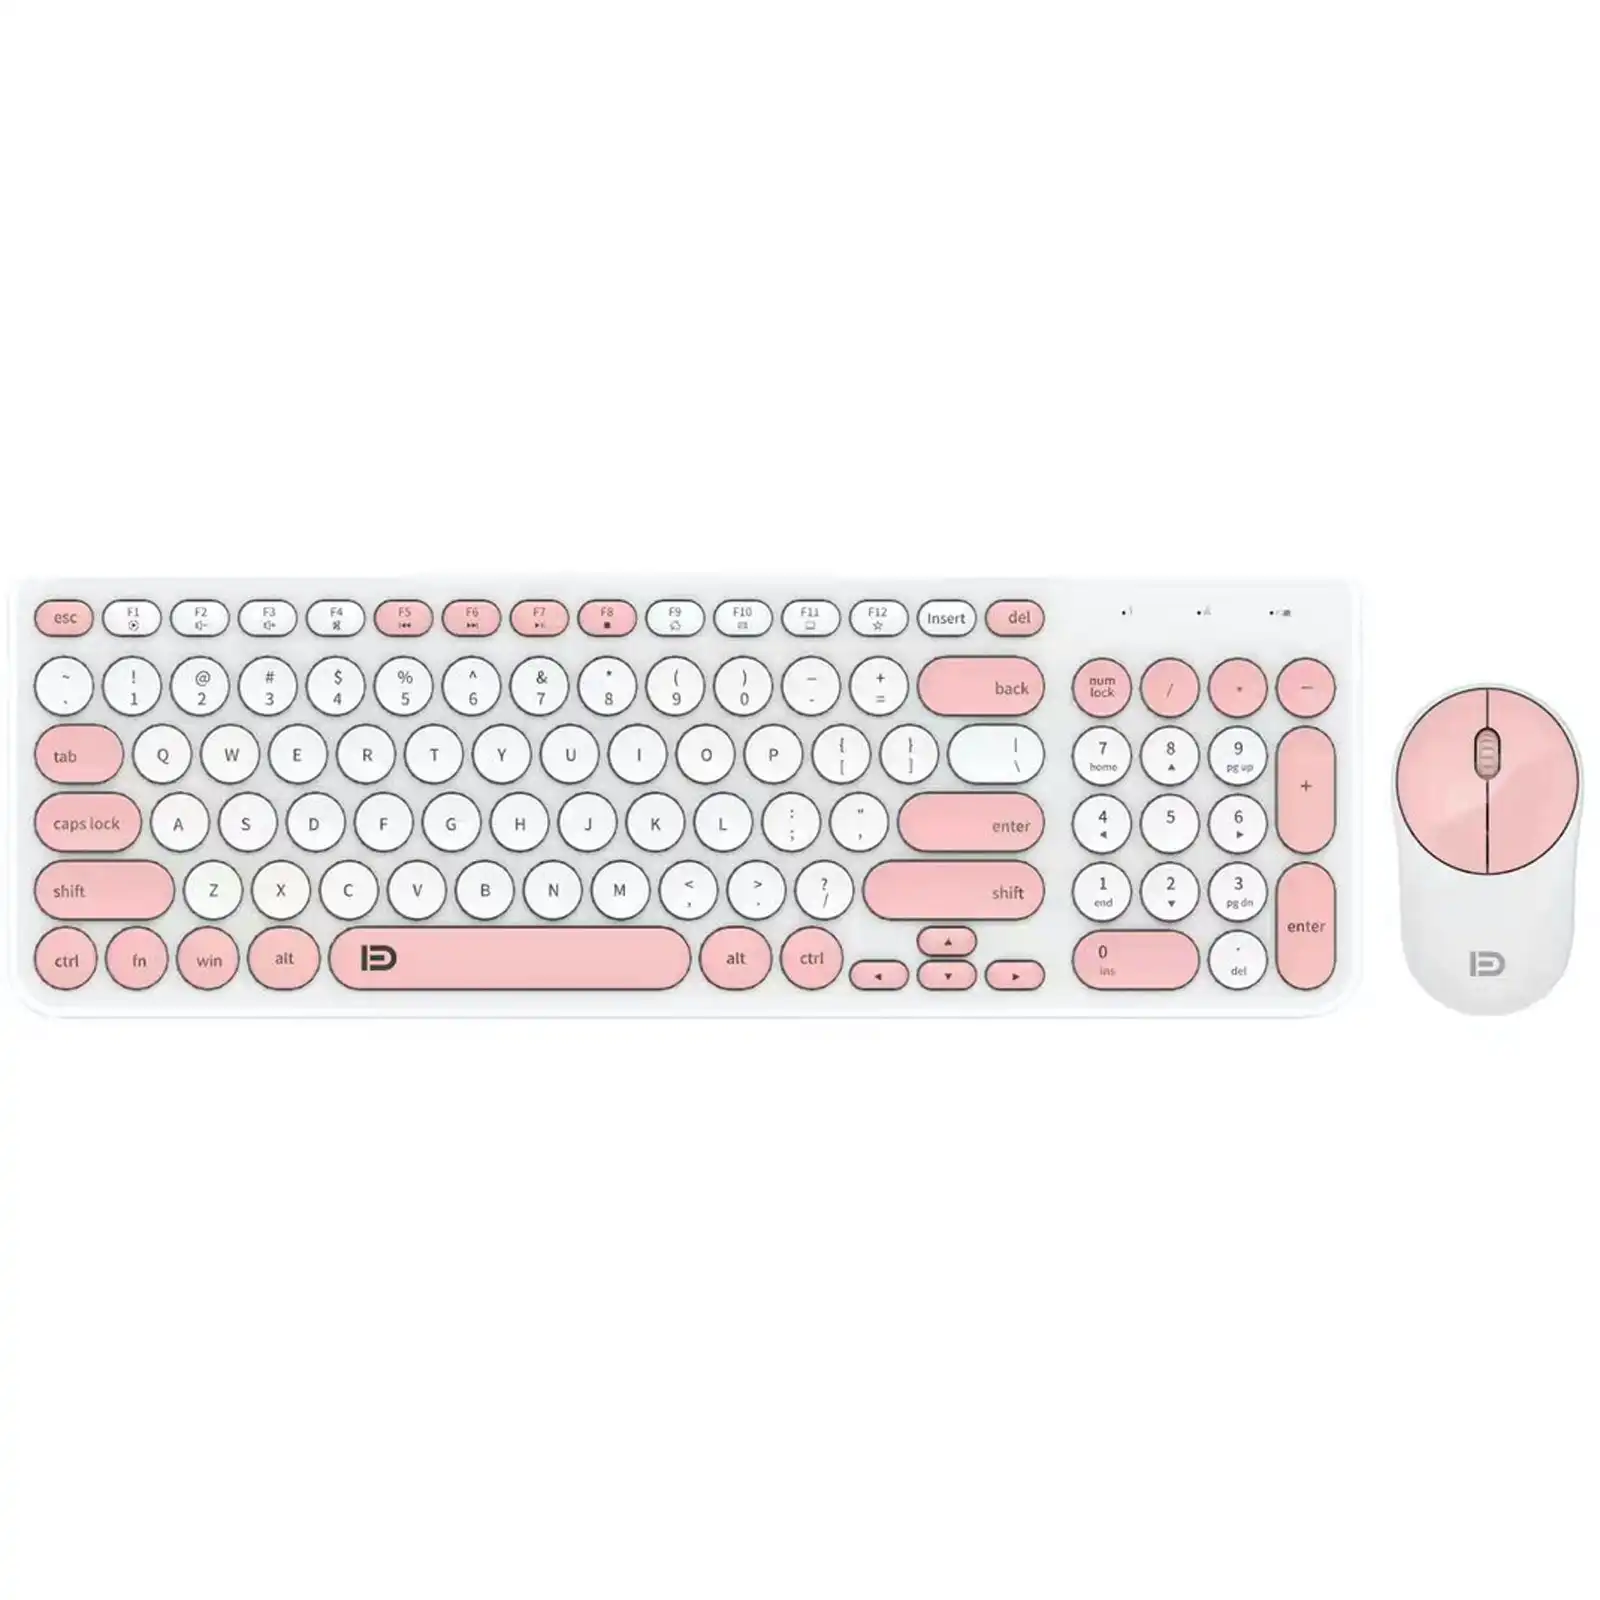 TODO 2.4Ghz Wireless Keyboard Mouse Combo Mac Windows Android - Pink